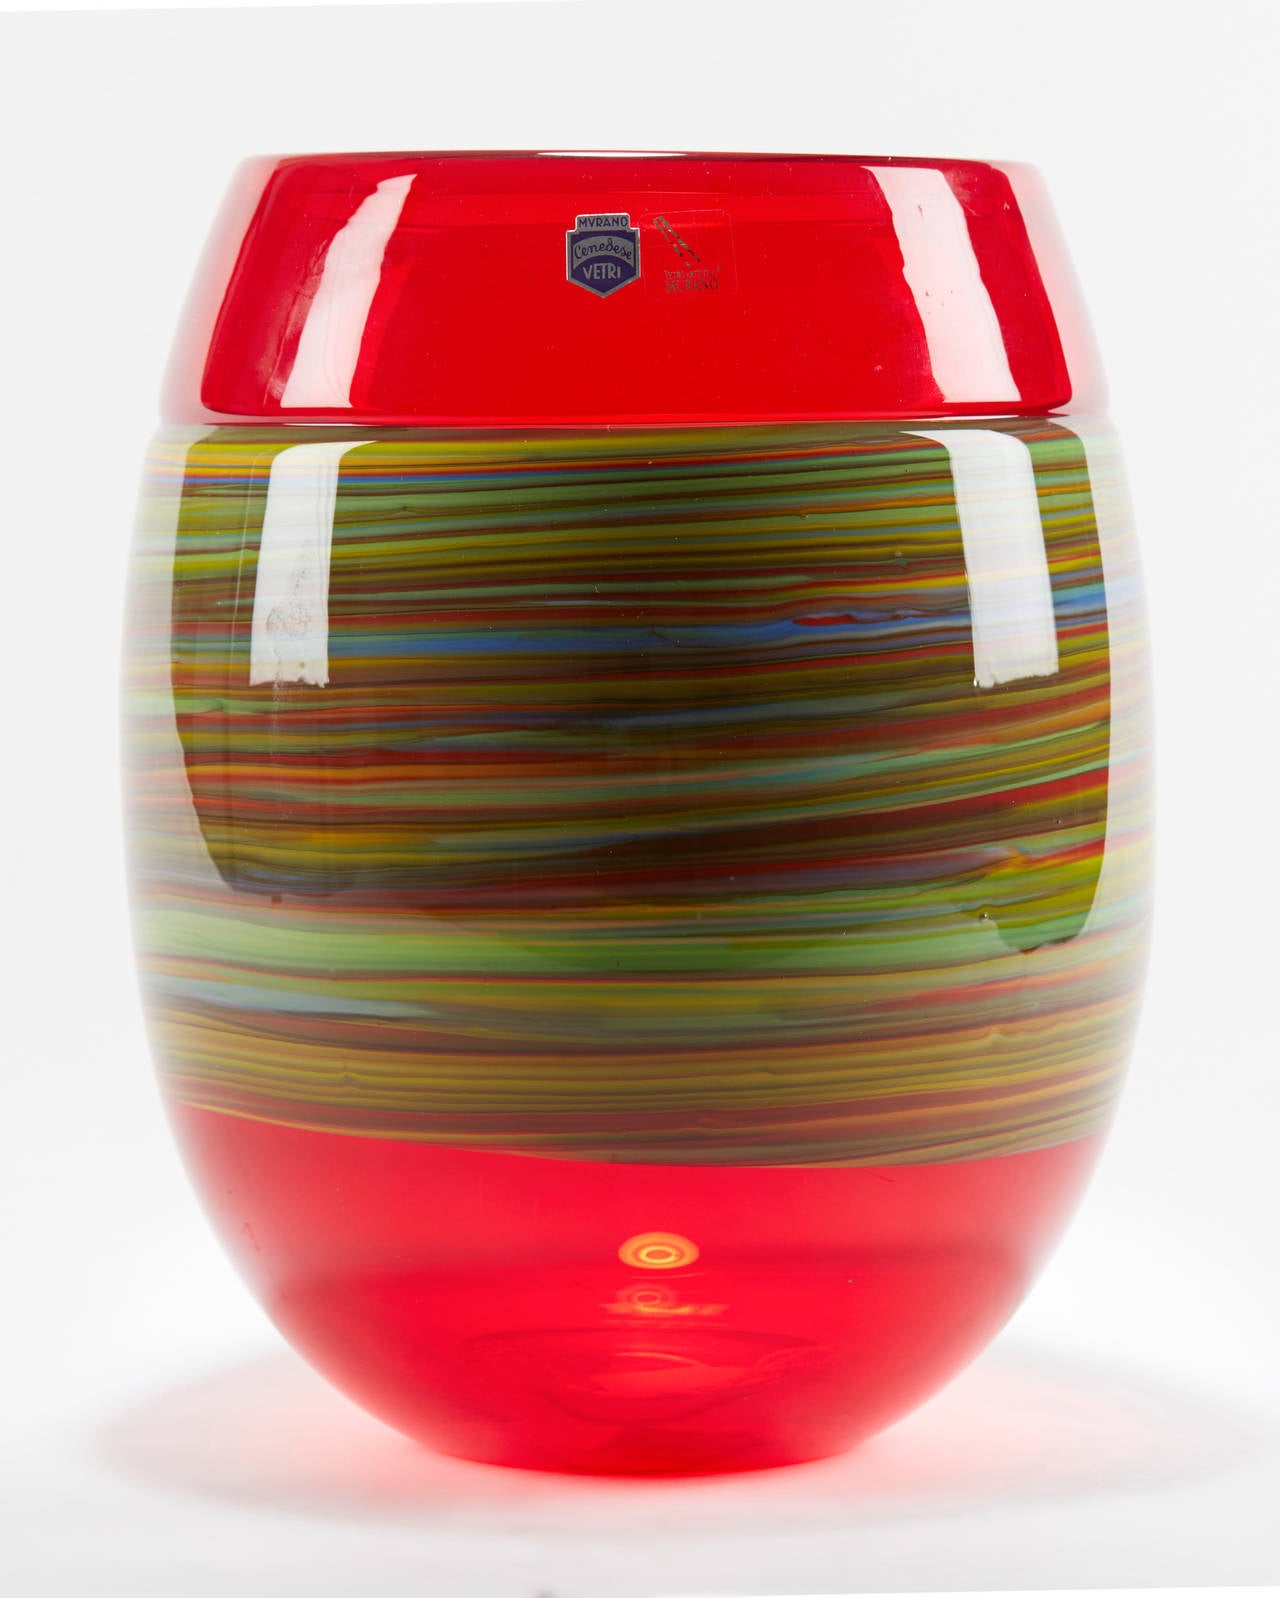 Murano handblown art glass vase by Gino Cenedese with clear red glass body with an opaque coloured glass swirl design applied around the middle of the vase. This heavily made vase has flat polished and signed base. 

Gino Cendese is one of the